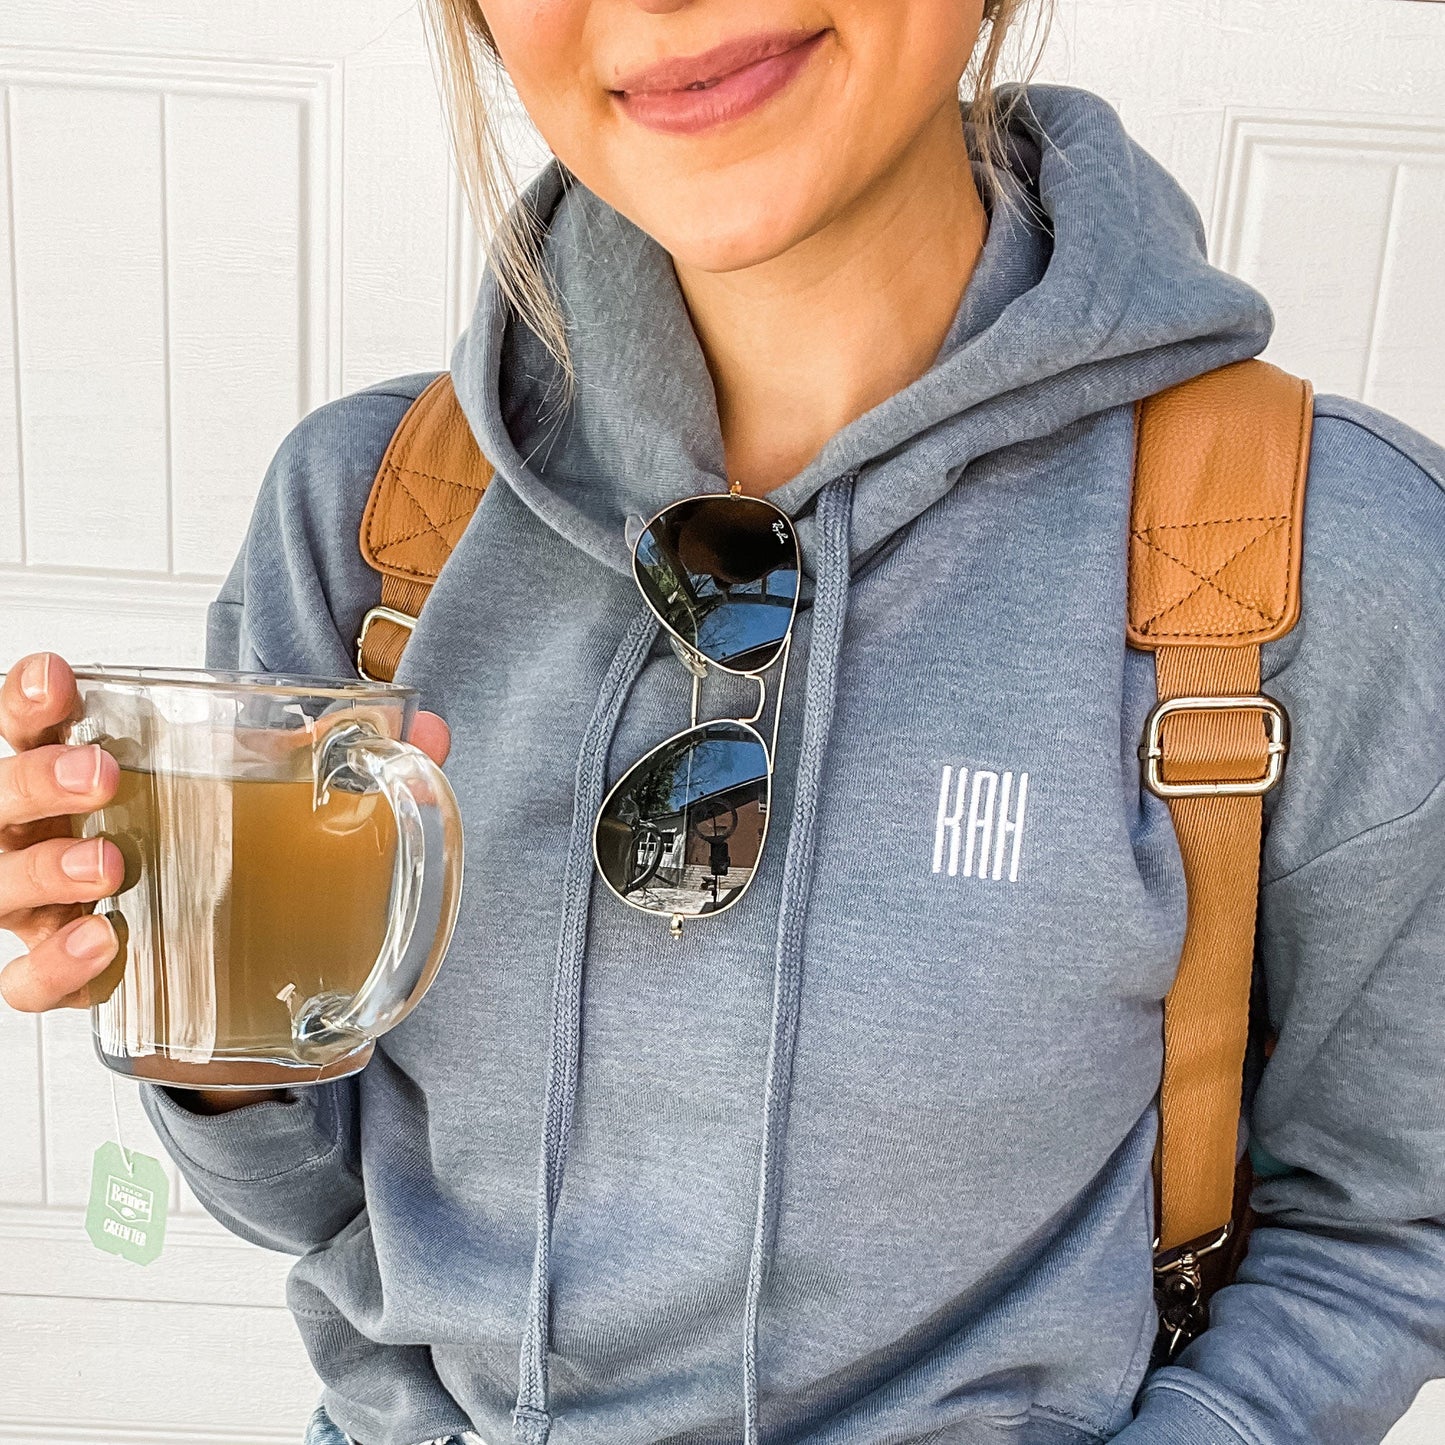 woman carrying backpack and tea mug sporting blue embroidered hoodie